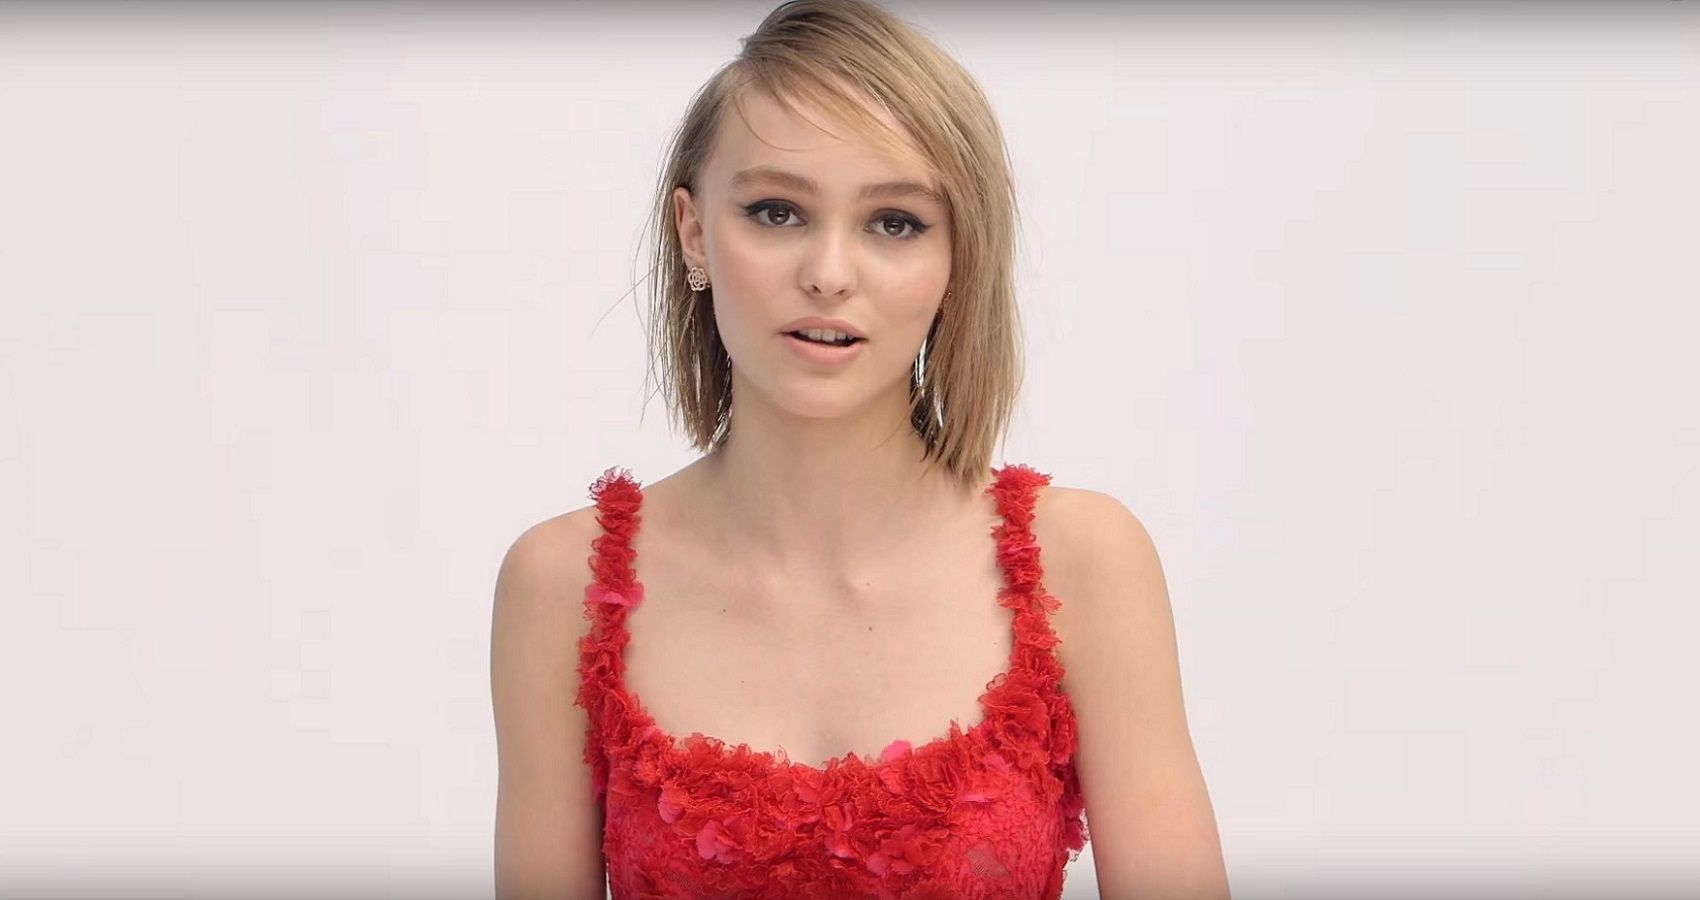 Lily-Rose Depp has dealt with serious health issues